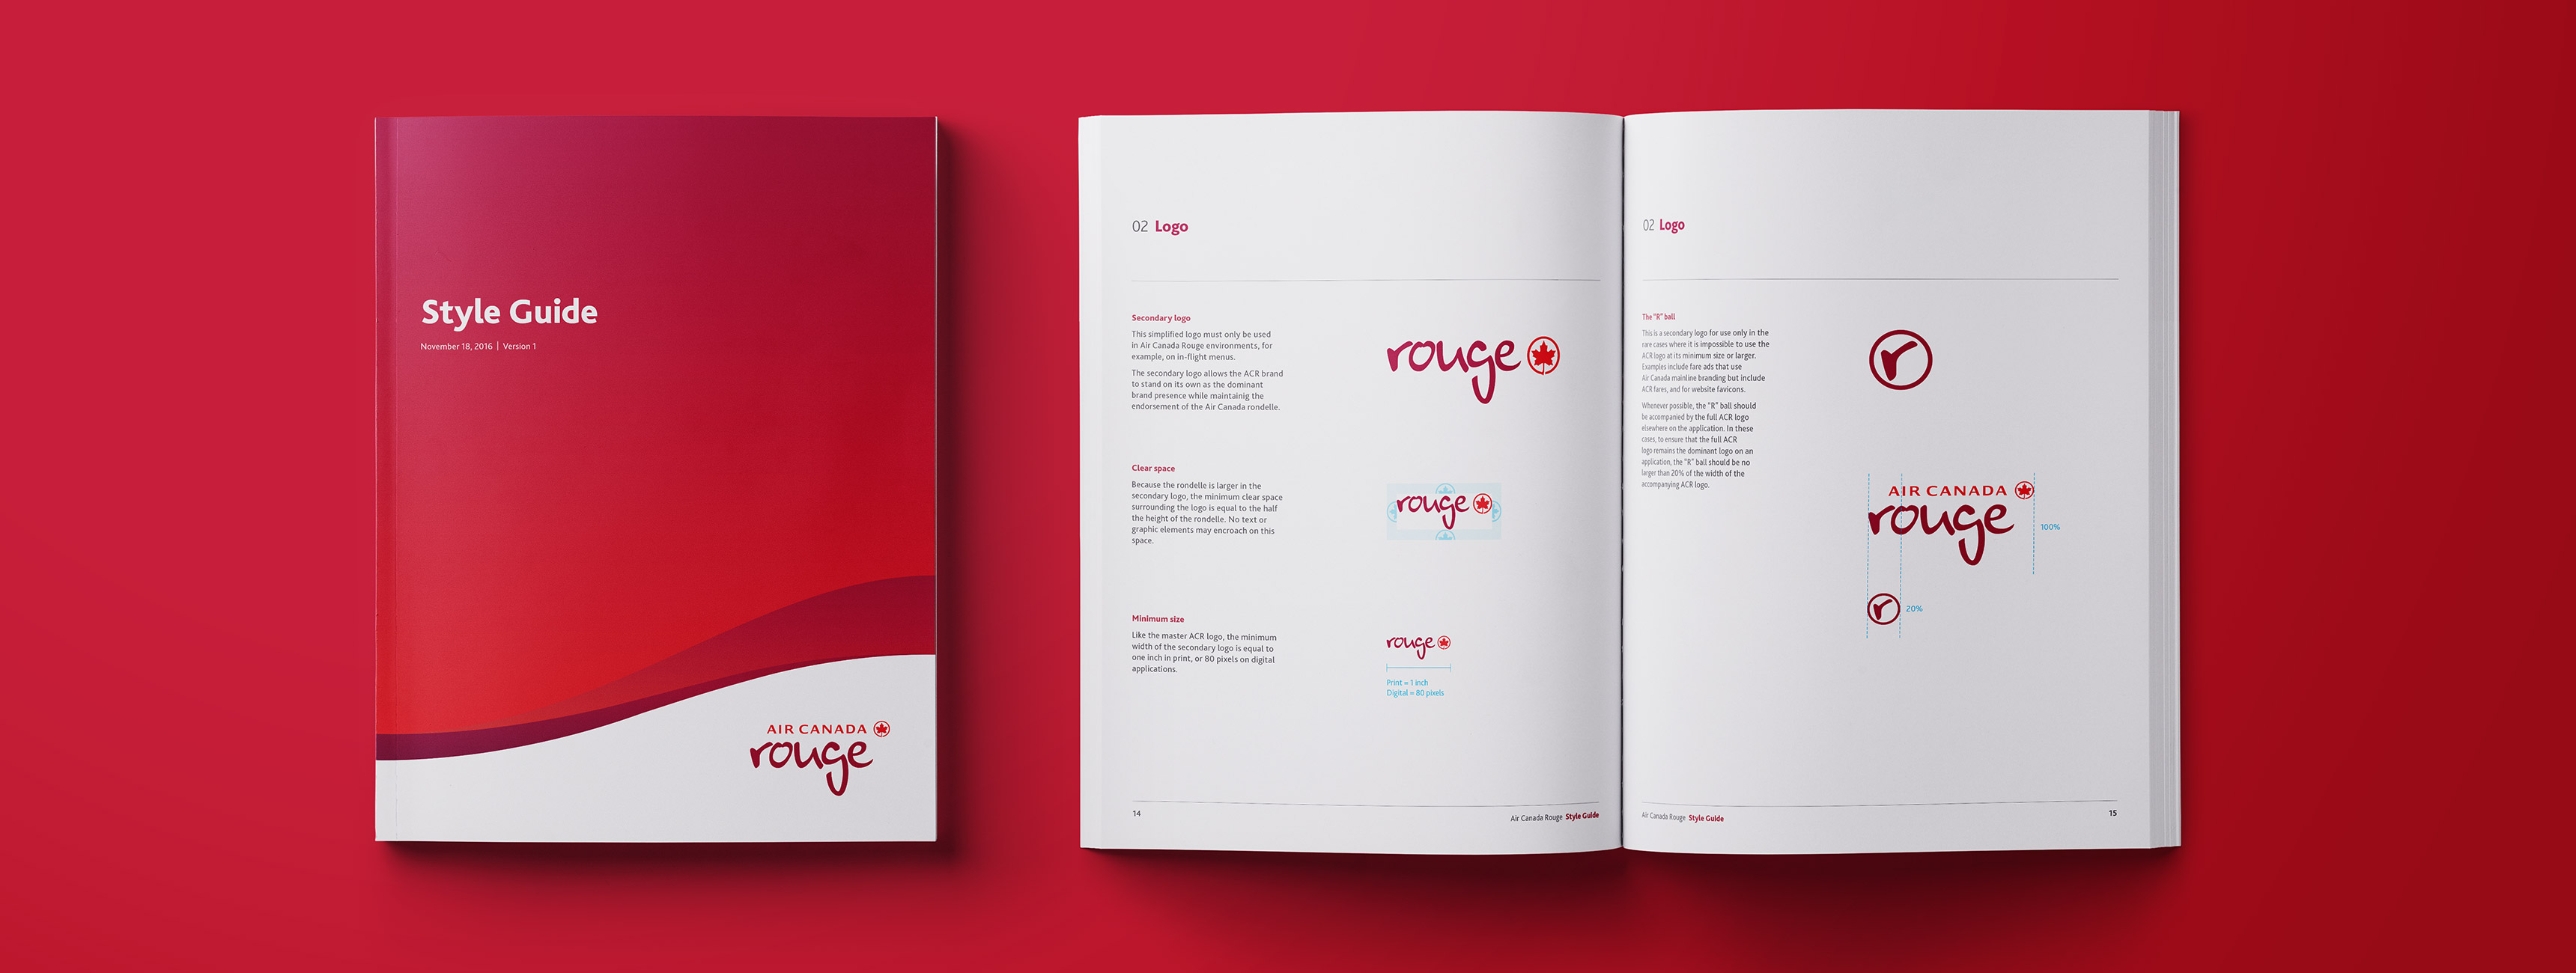 Cover and interior spread from the Air Canada Rouge style guide